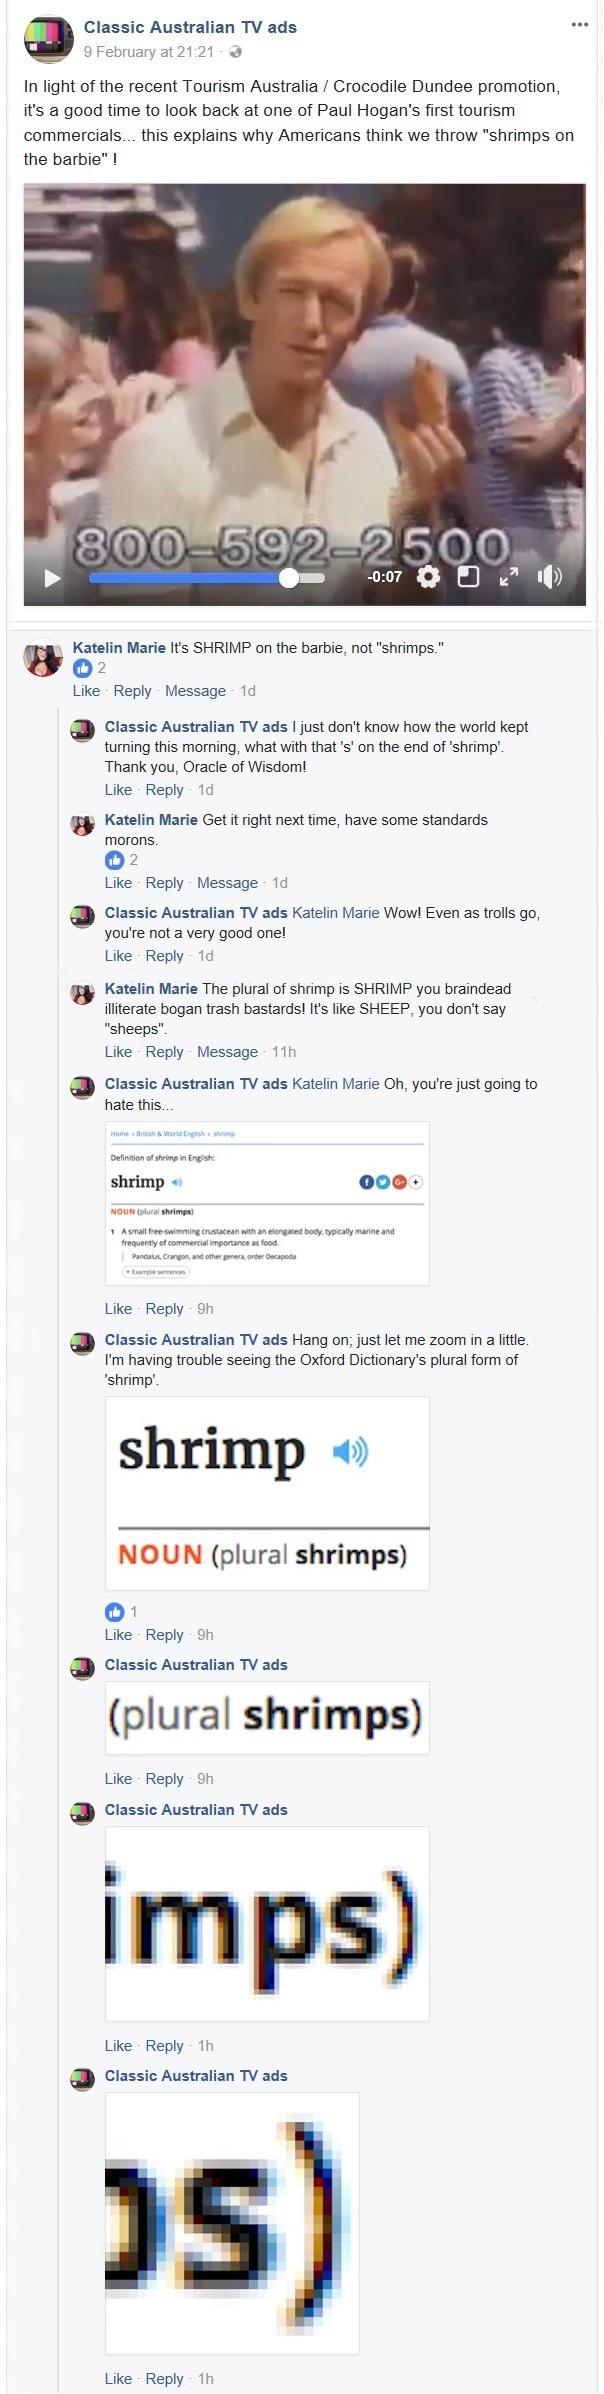 This exchange between a Facebook page-owner and a troll